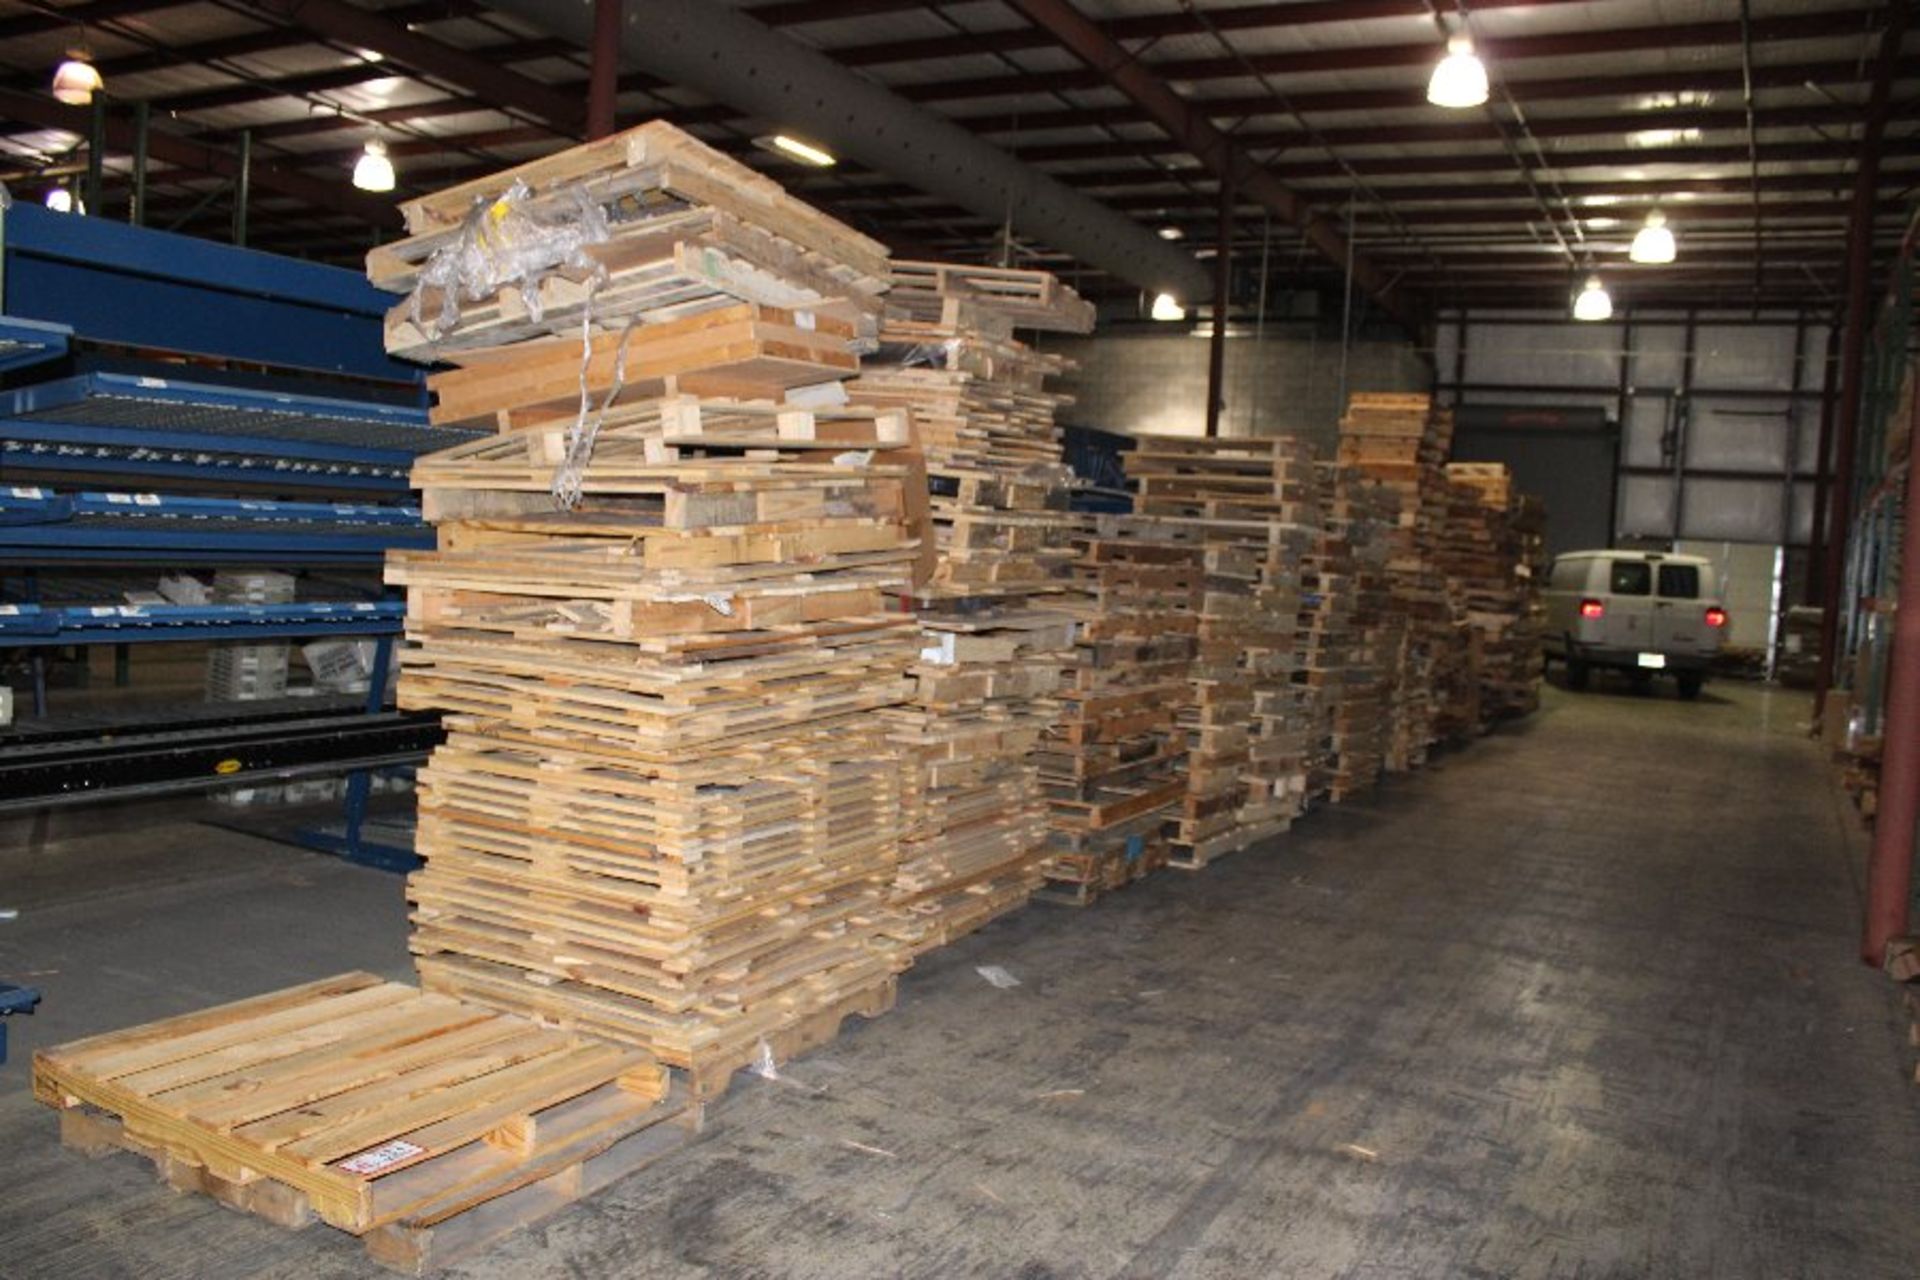 Approx 130 Various Sized Pallets & Crate Material